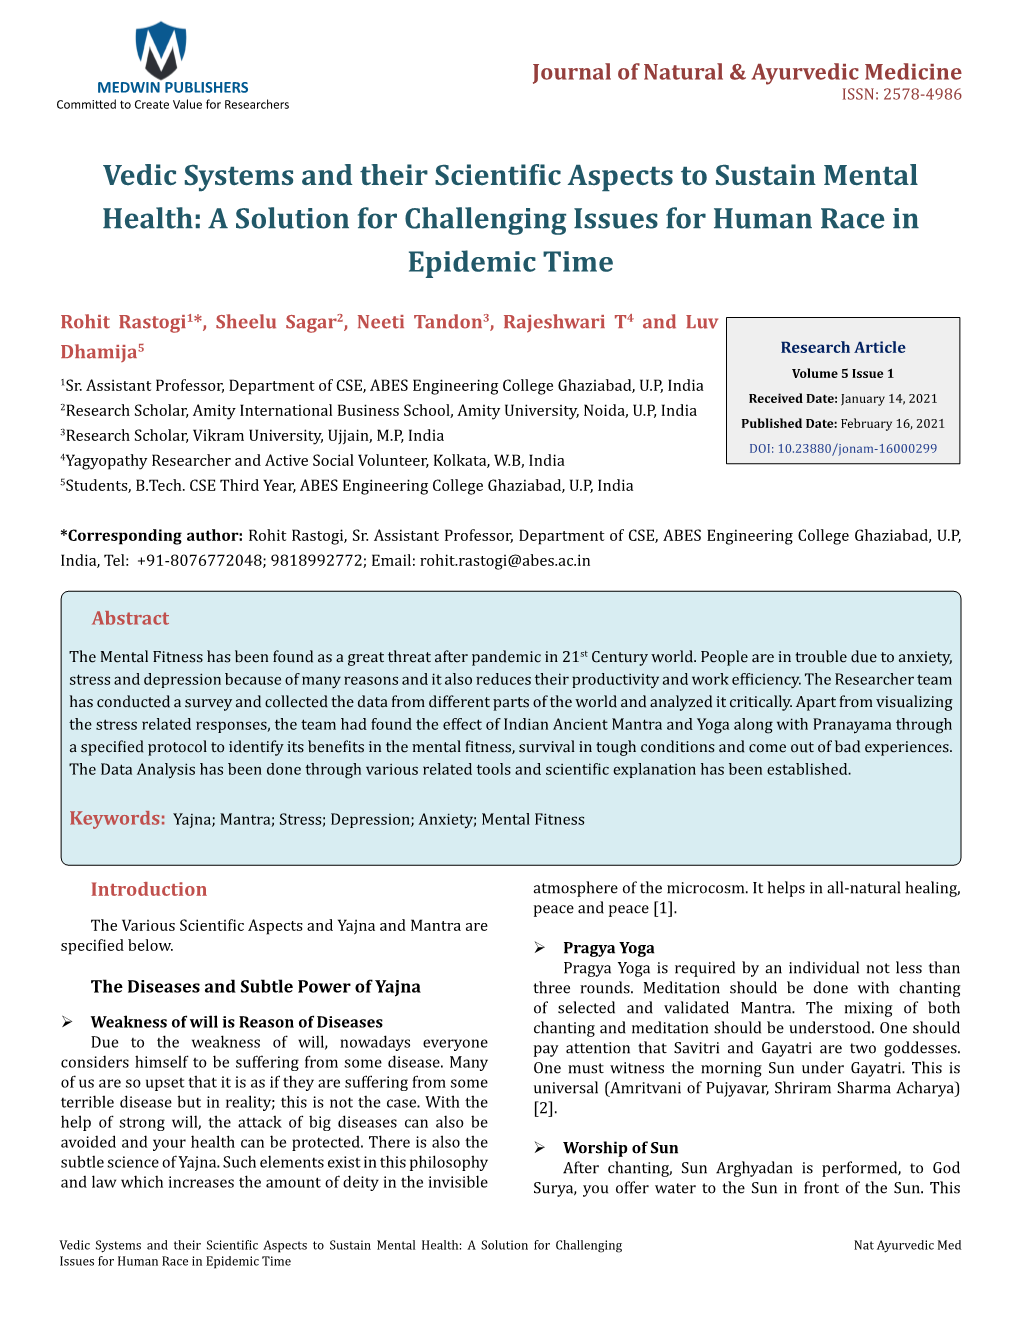 Vedic Systems and Their Scientific Aspects to Sustain Mental Health: a Solution for Challenging Issues for Human Race in Epidemic Time